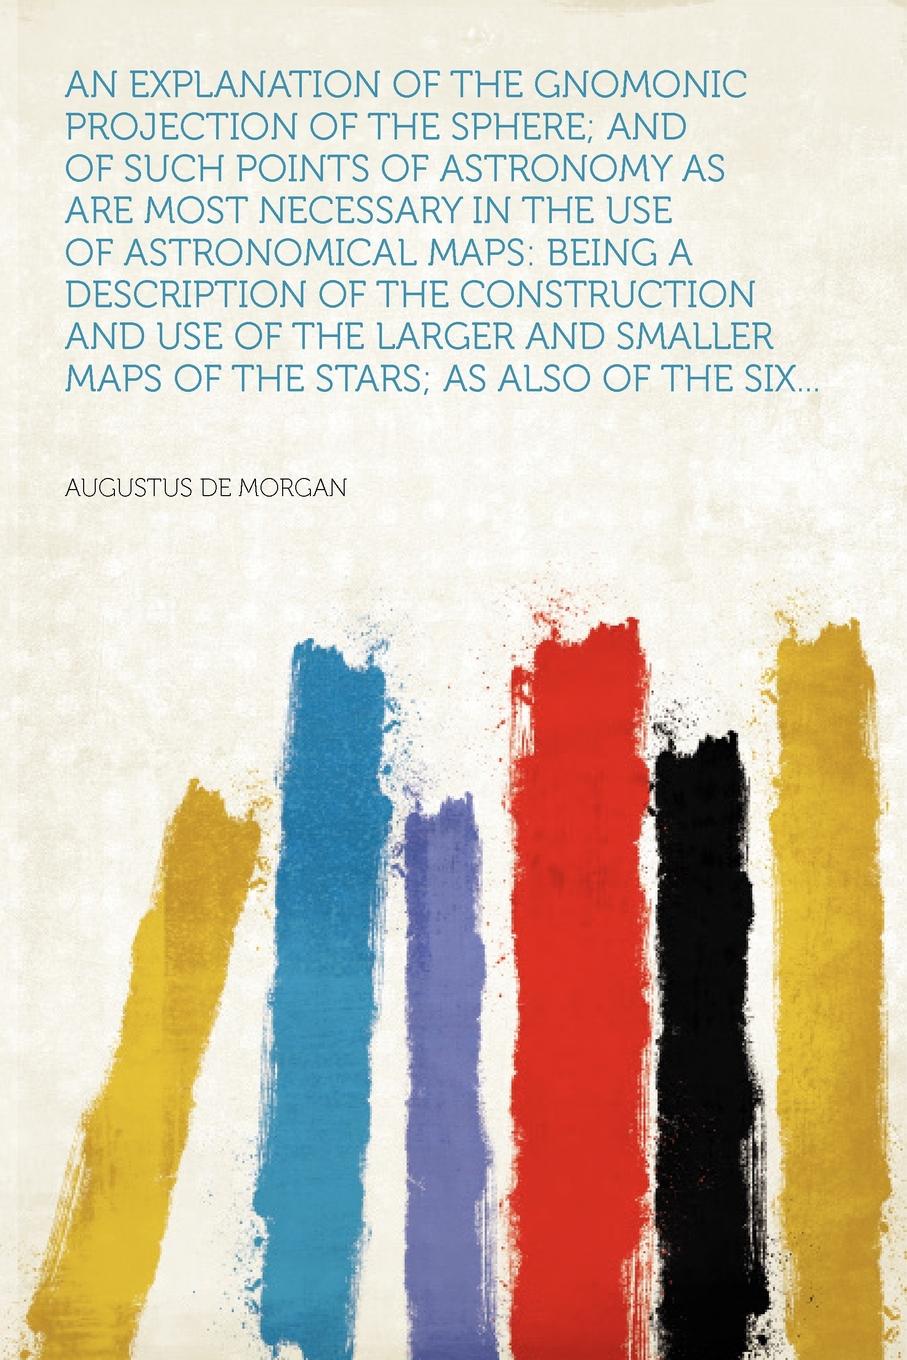 An Explanation of the Gnomonic Projection of the Sphere; and of Such Points of Astronomy as Are Most Necessary in the Use of Astronomical Maps. Being a Description of the Construction and Use of the Larger and Smaller Maps of the Stars; as Also of...